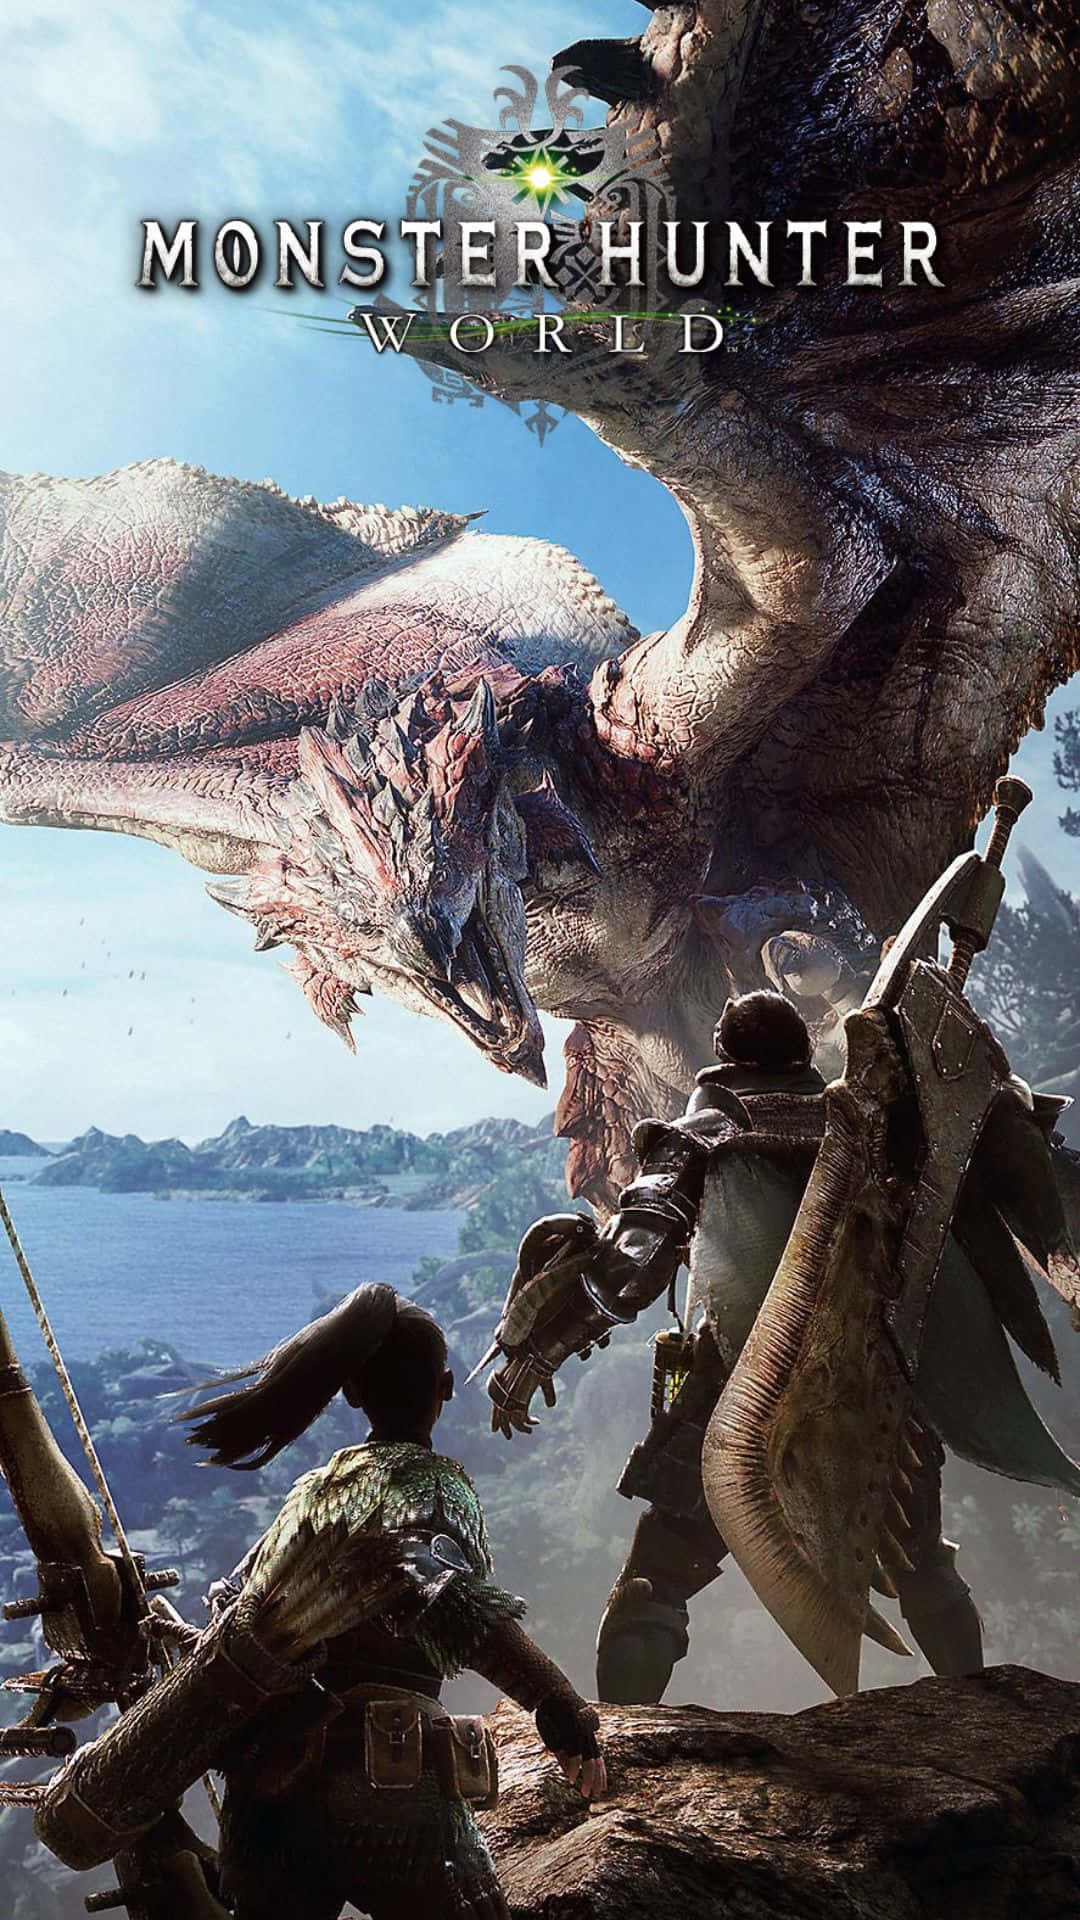 Immerse yourself in a new hunt with Monster Hunter World on Android!